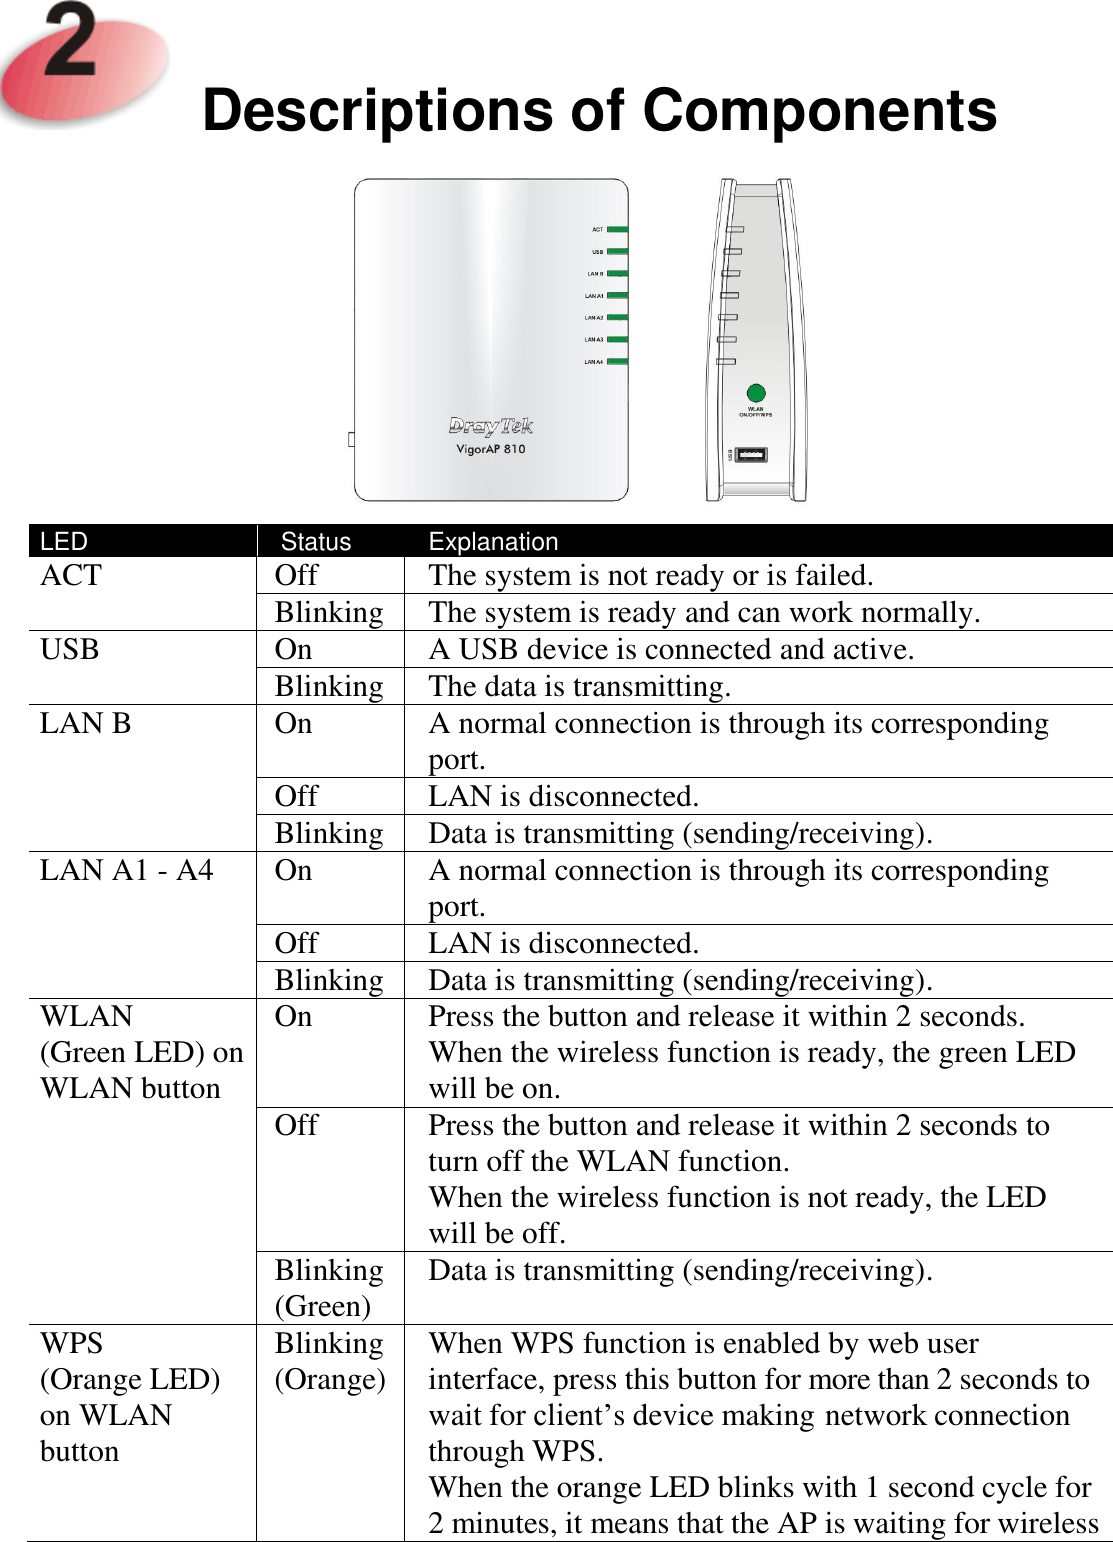     Descriptions of Components         LED Status Explanation ACT Off The system is not ready or is failed. Blinking The system is ready and can work normally. USB On A USB device is connected and active. Blinking The data is transmitting. LAN B On A normal connection is through its corresponding port. Off LAN is disconnected. Blinking Data is transmitting (sending/receiving). LAN A1 - A4 On A normal connection is through its corresponding port. Off LAN is disconnected. Blinking Data is transmitting (sending/receiving). WLAN (Green LED) on WLAN button On Press the button and release it within 2 seconds.   When the wireless function is ready, the green LED will be on. Off Press the button and release it within 2 seconds to turn off the WLAN function. When the wireless function is not ready, the LED will be off. Blinking (Green) Data is transmitting (sending/receiving). WPS (Orange LED) on WLAN button Blinking (Orange) When WPS function is enabled by web user interface, press this button for more than 2 seconds to wait for client’s device making network connection through WPS. When the orange LED blinks with 1 second cycle for 2 minutes, it means that the AP is waiting for wireless 